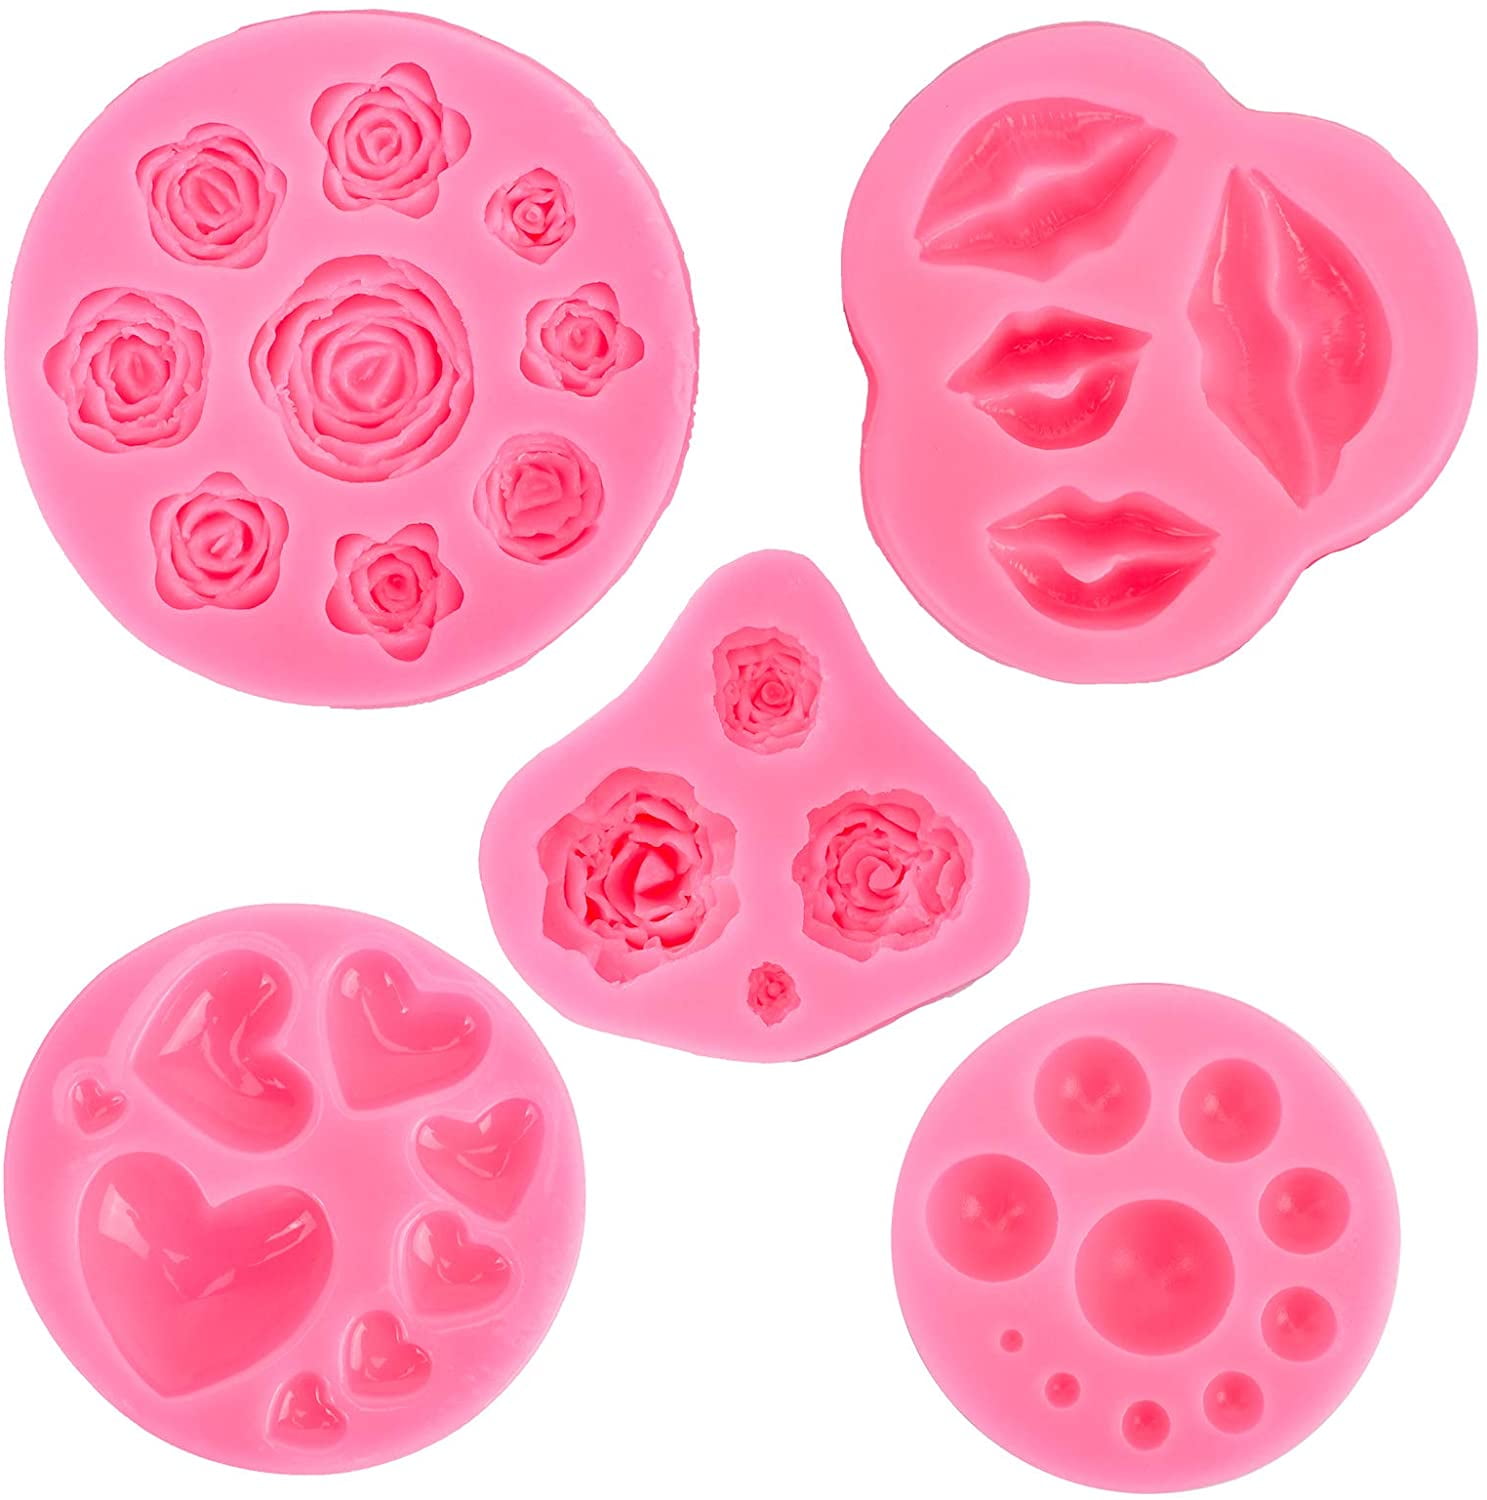 INNKER 3Pack Wedding Fondant Cake Molds Set Lips Heart and Dot Silicone Candy Cake Baking Mold for Sugar Cake Decor DIY Wedding Valentines Day Party Dessert Chocolate 